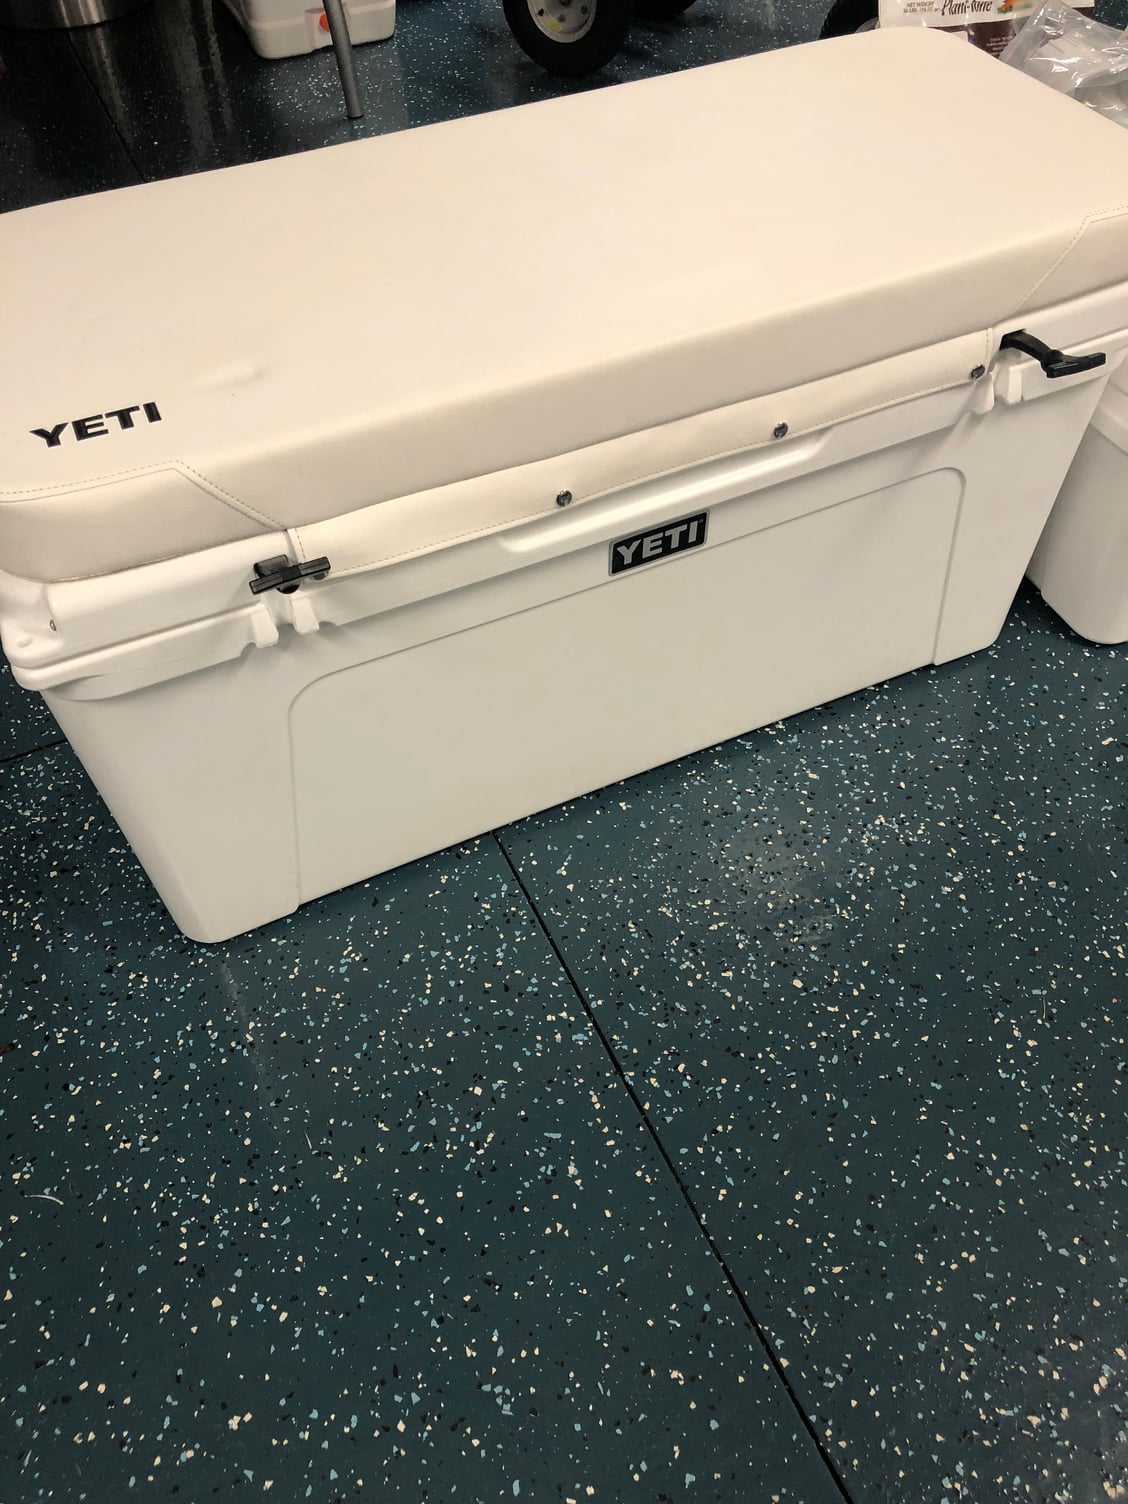 Yeti cooler - The Hull Truth - Boating and Fishing Forum